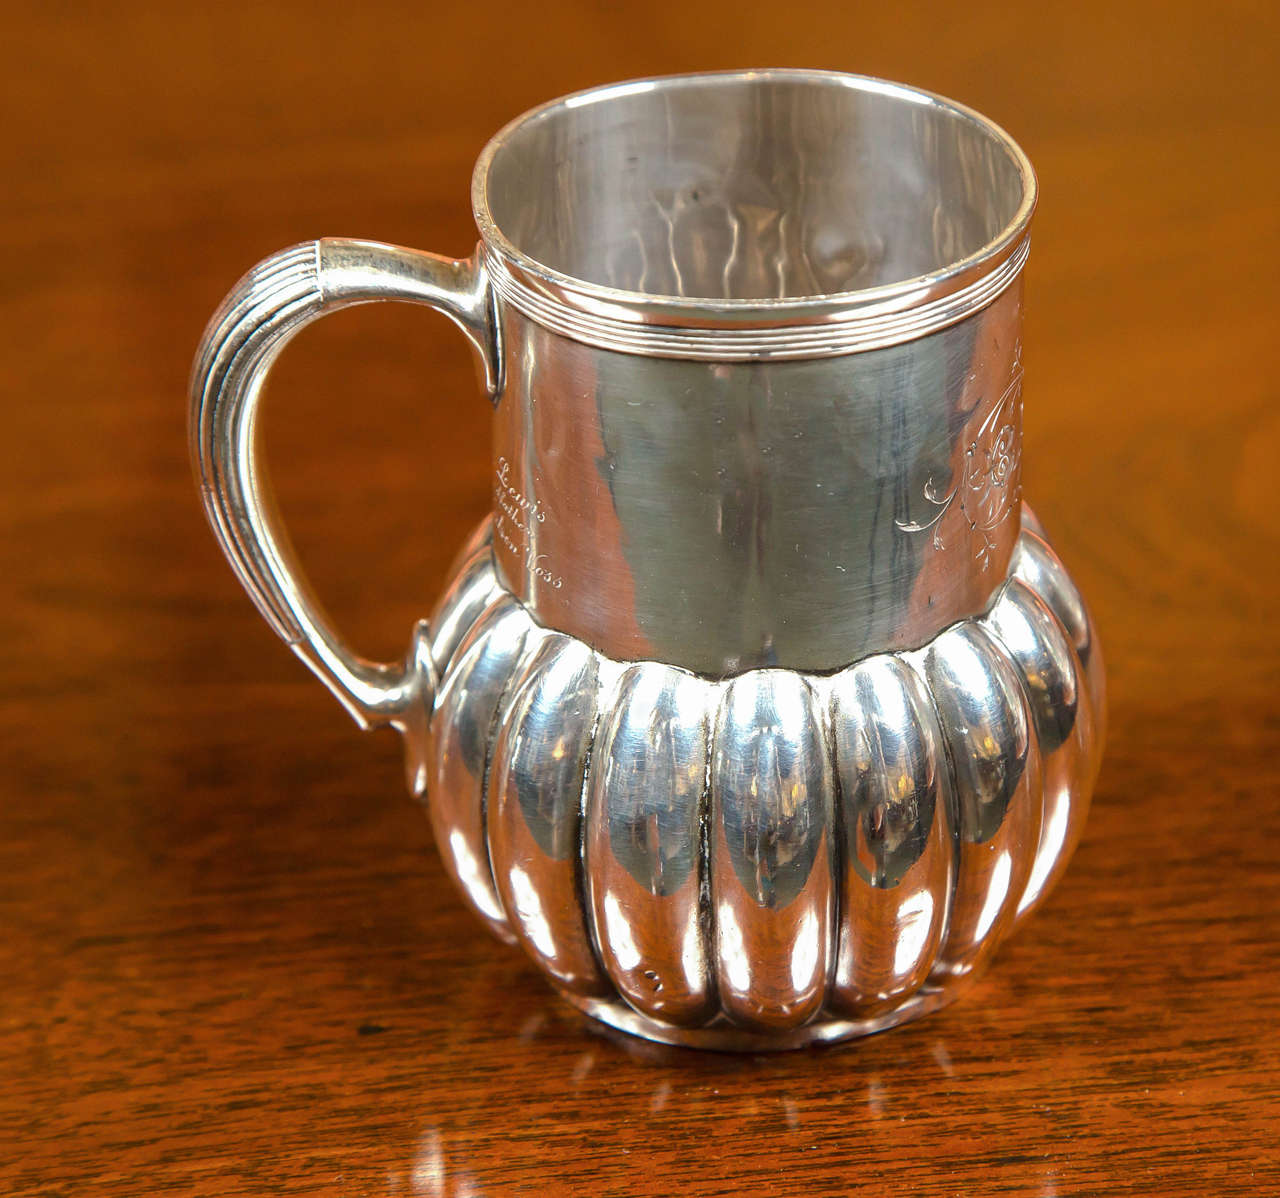 Tiffany & Co. silver cup with engravings.